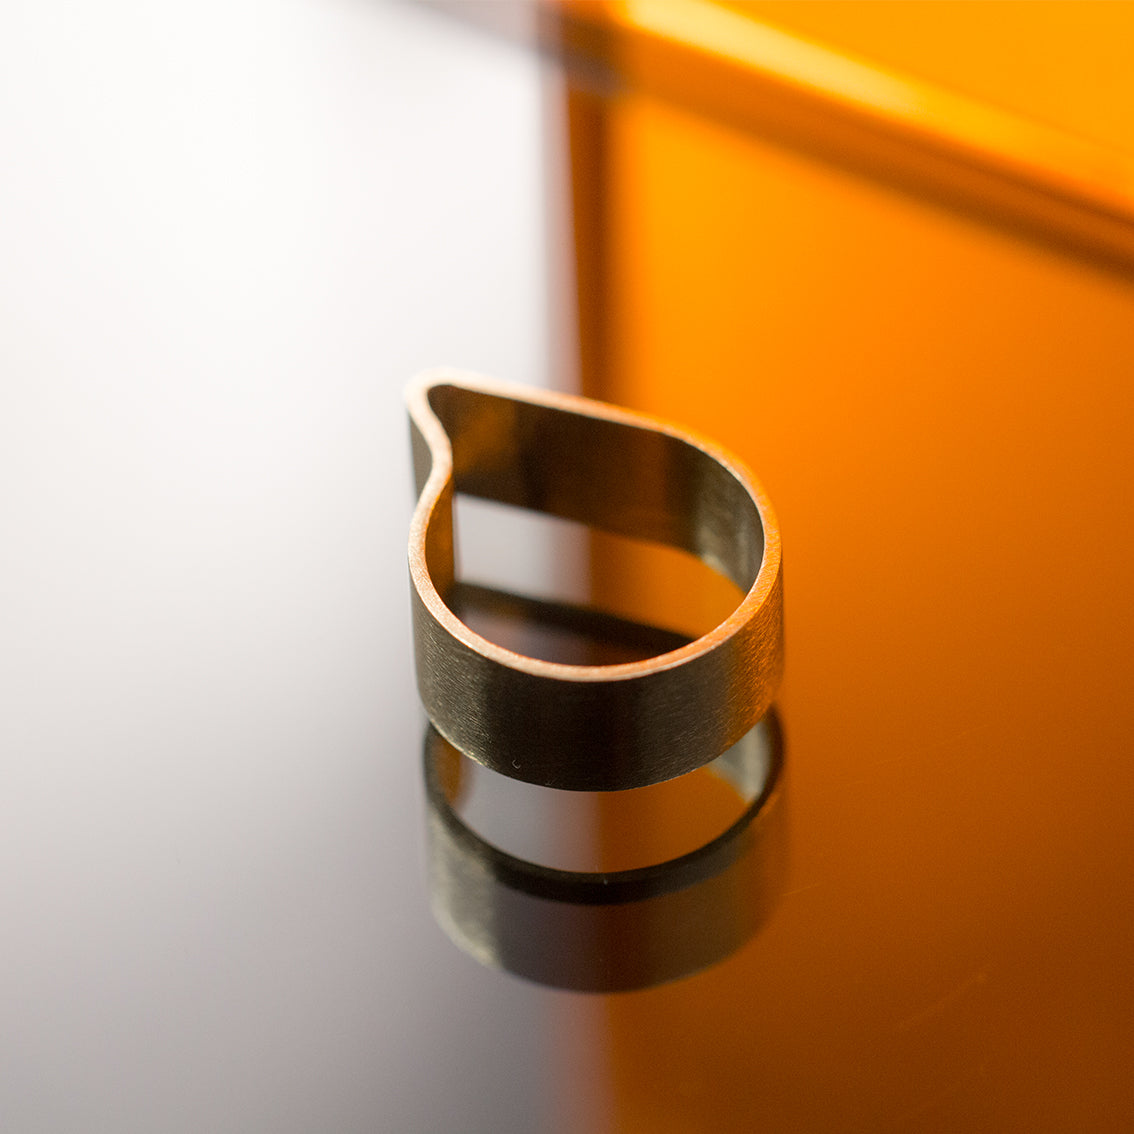 A minimally designed comma shaped ring with a soft curvy boundry. It's made of brushed brass and located on a reflective surface with orange coloured glass in the background. The ring and the orange tinted glass is reflected on the base reflective surface.